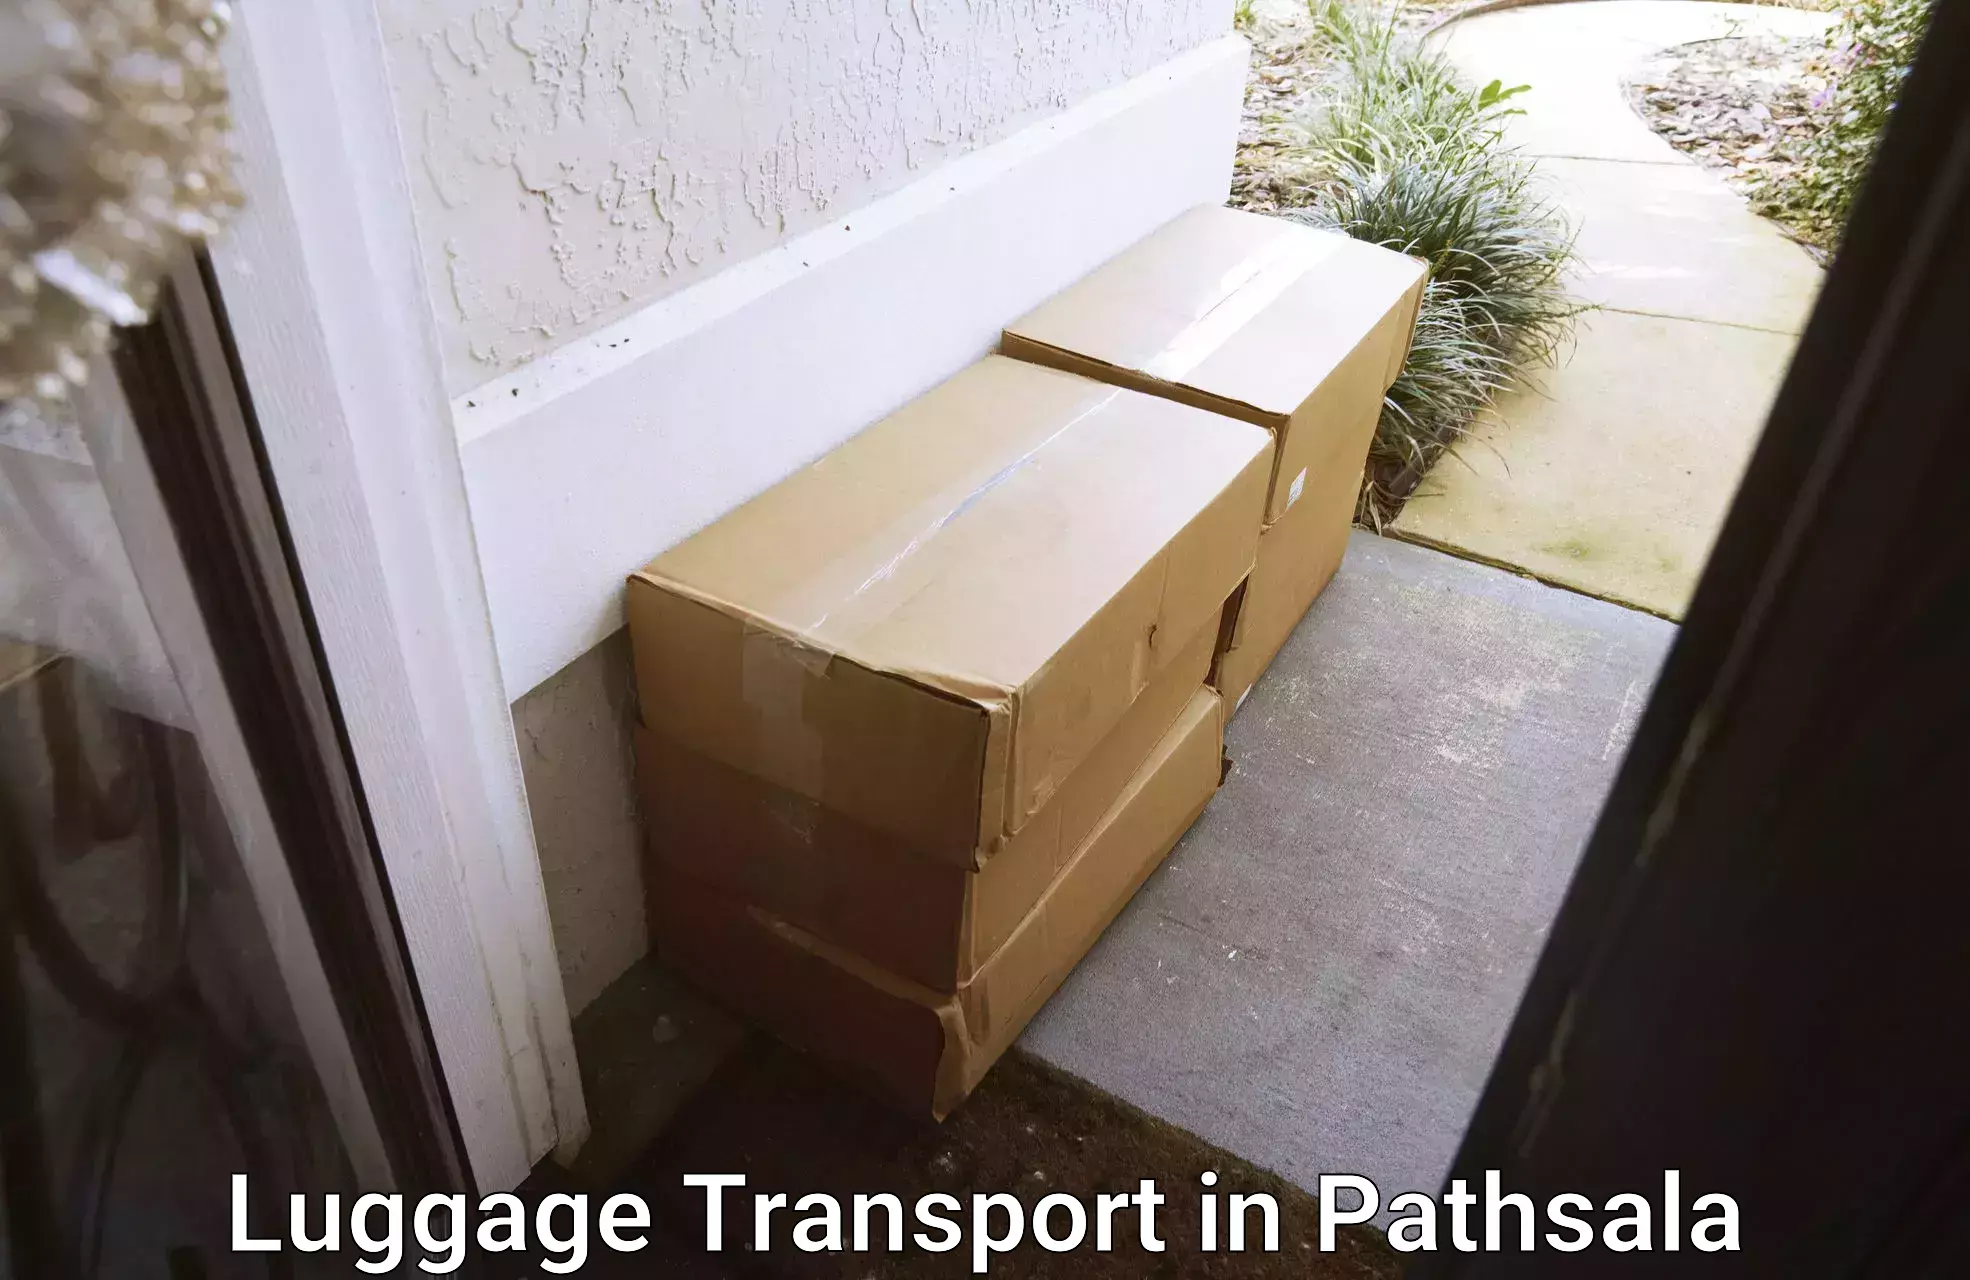 Baggage transport cost in Pathsala